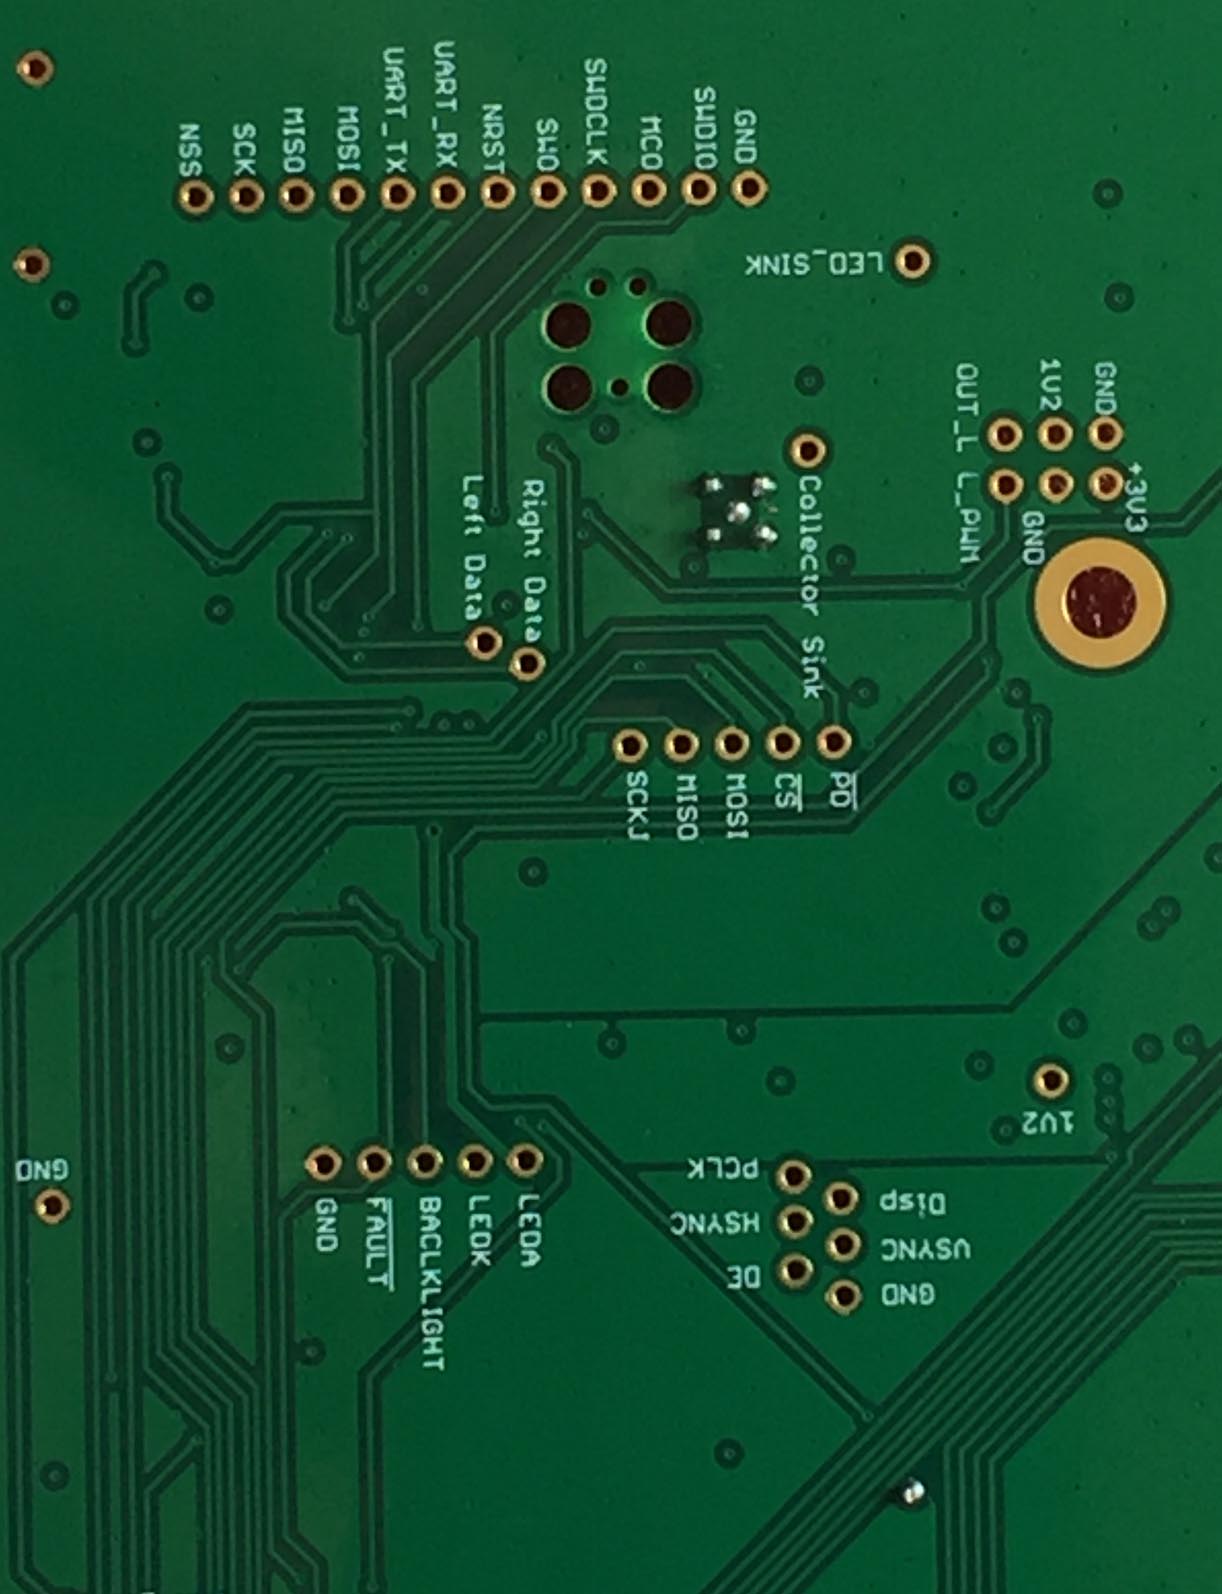 PCB Silkscreen: Consider your Stakeholders